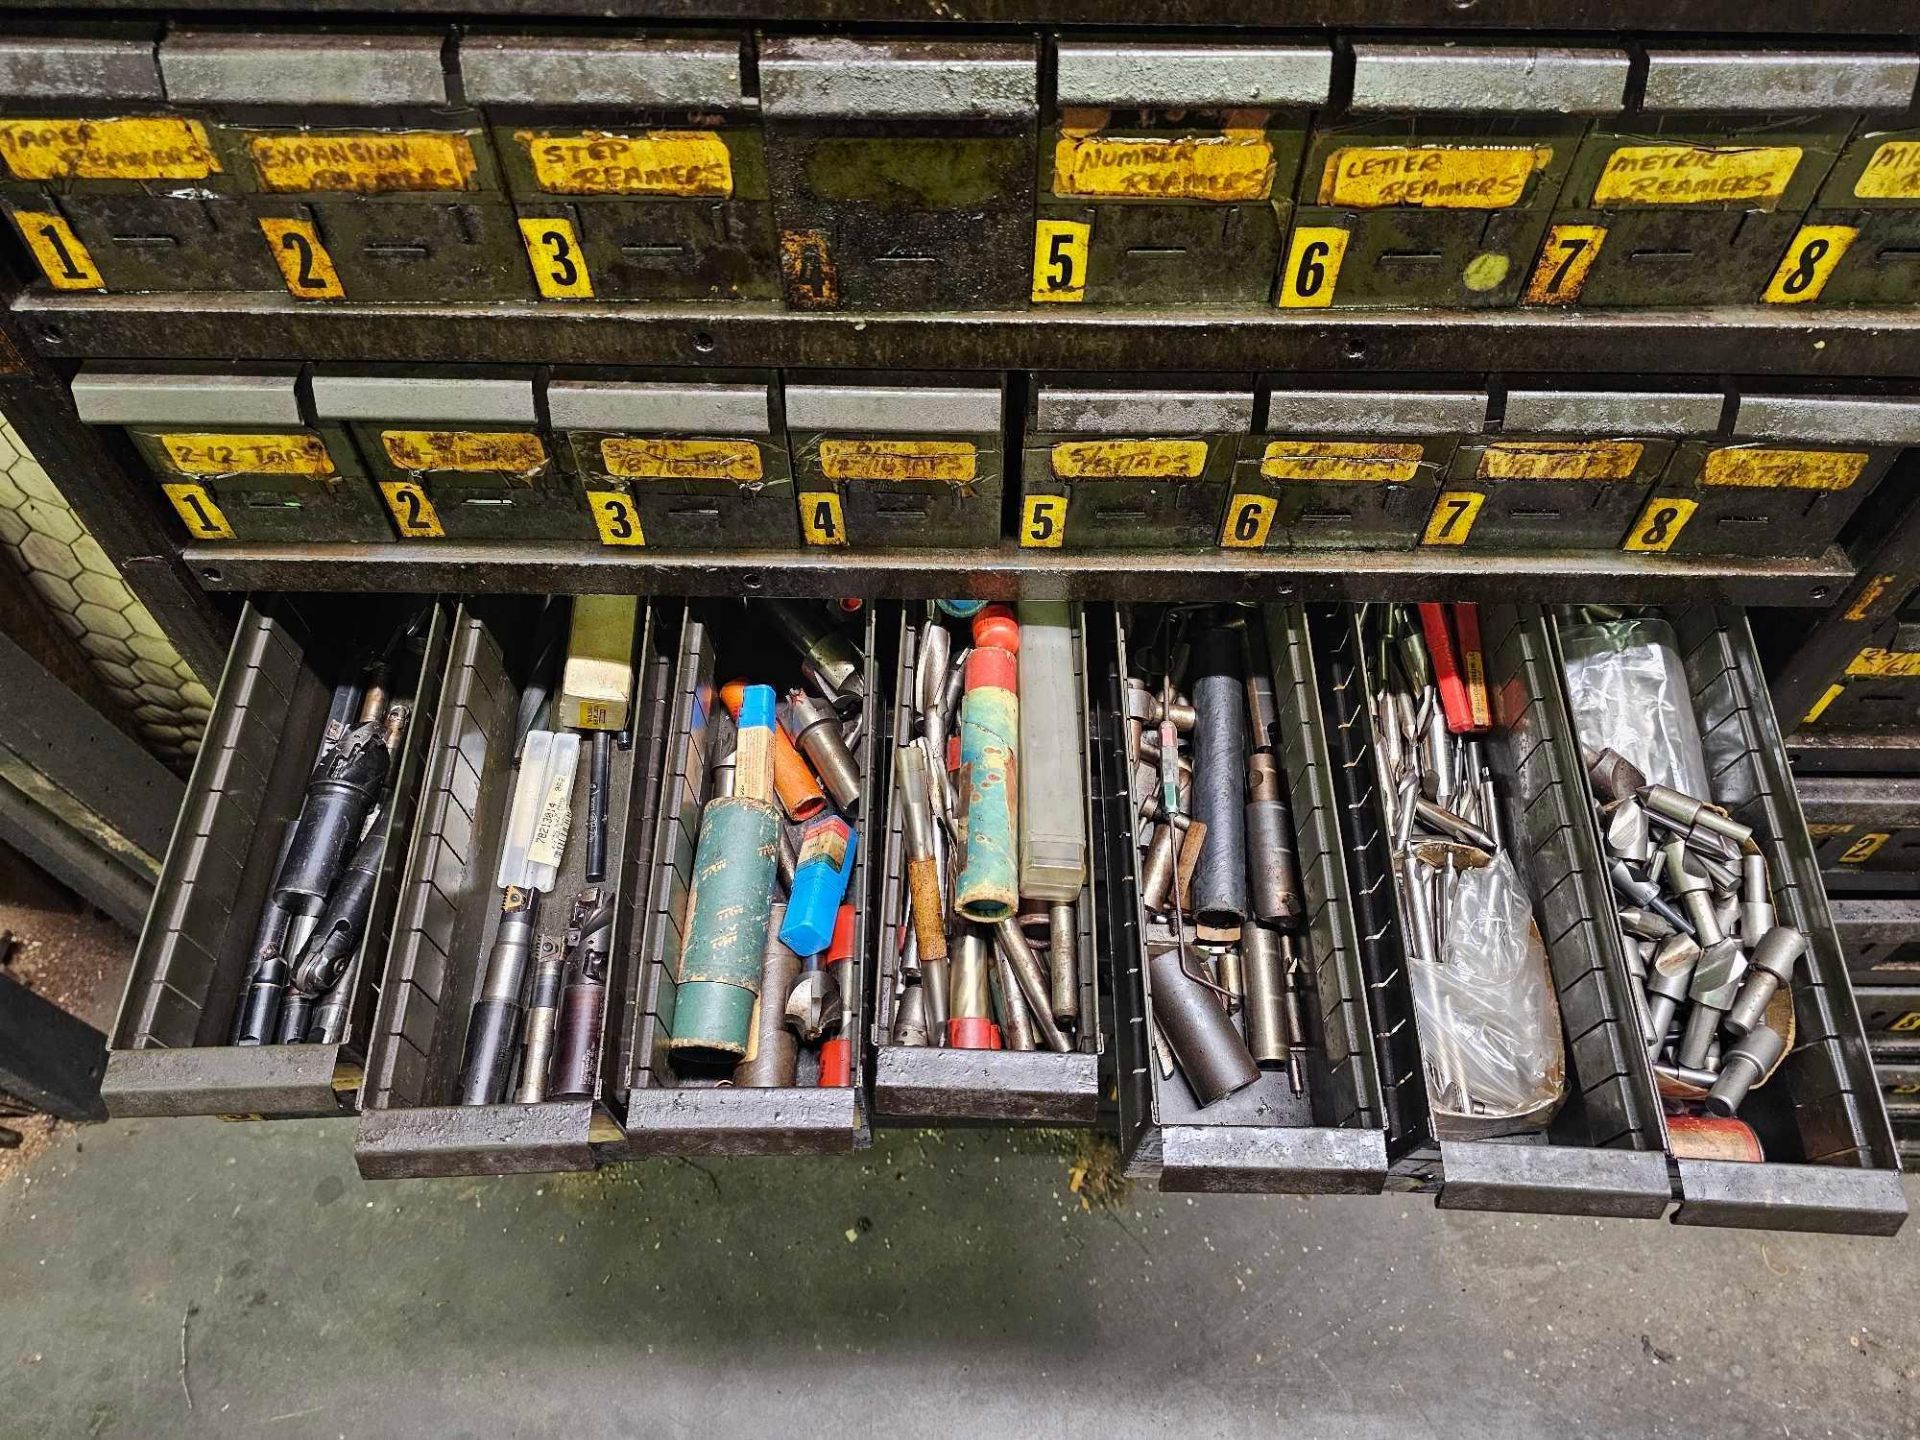 SHELVING W/ CUTTER, TAP, REAMER, MILL, DRILL BIT, DRILL, COUNTERSINK, COUNTERBORE TOOLS & FASTENERS - Image 15 of 31